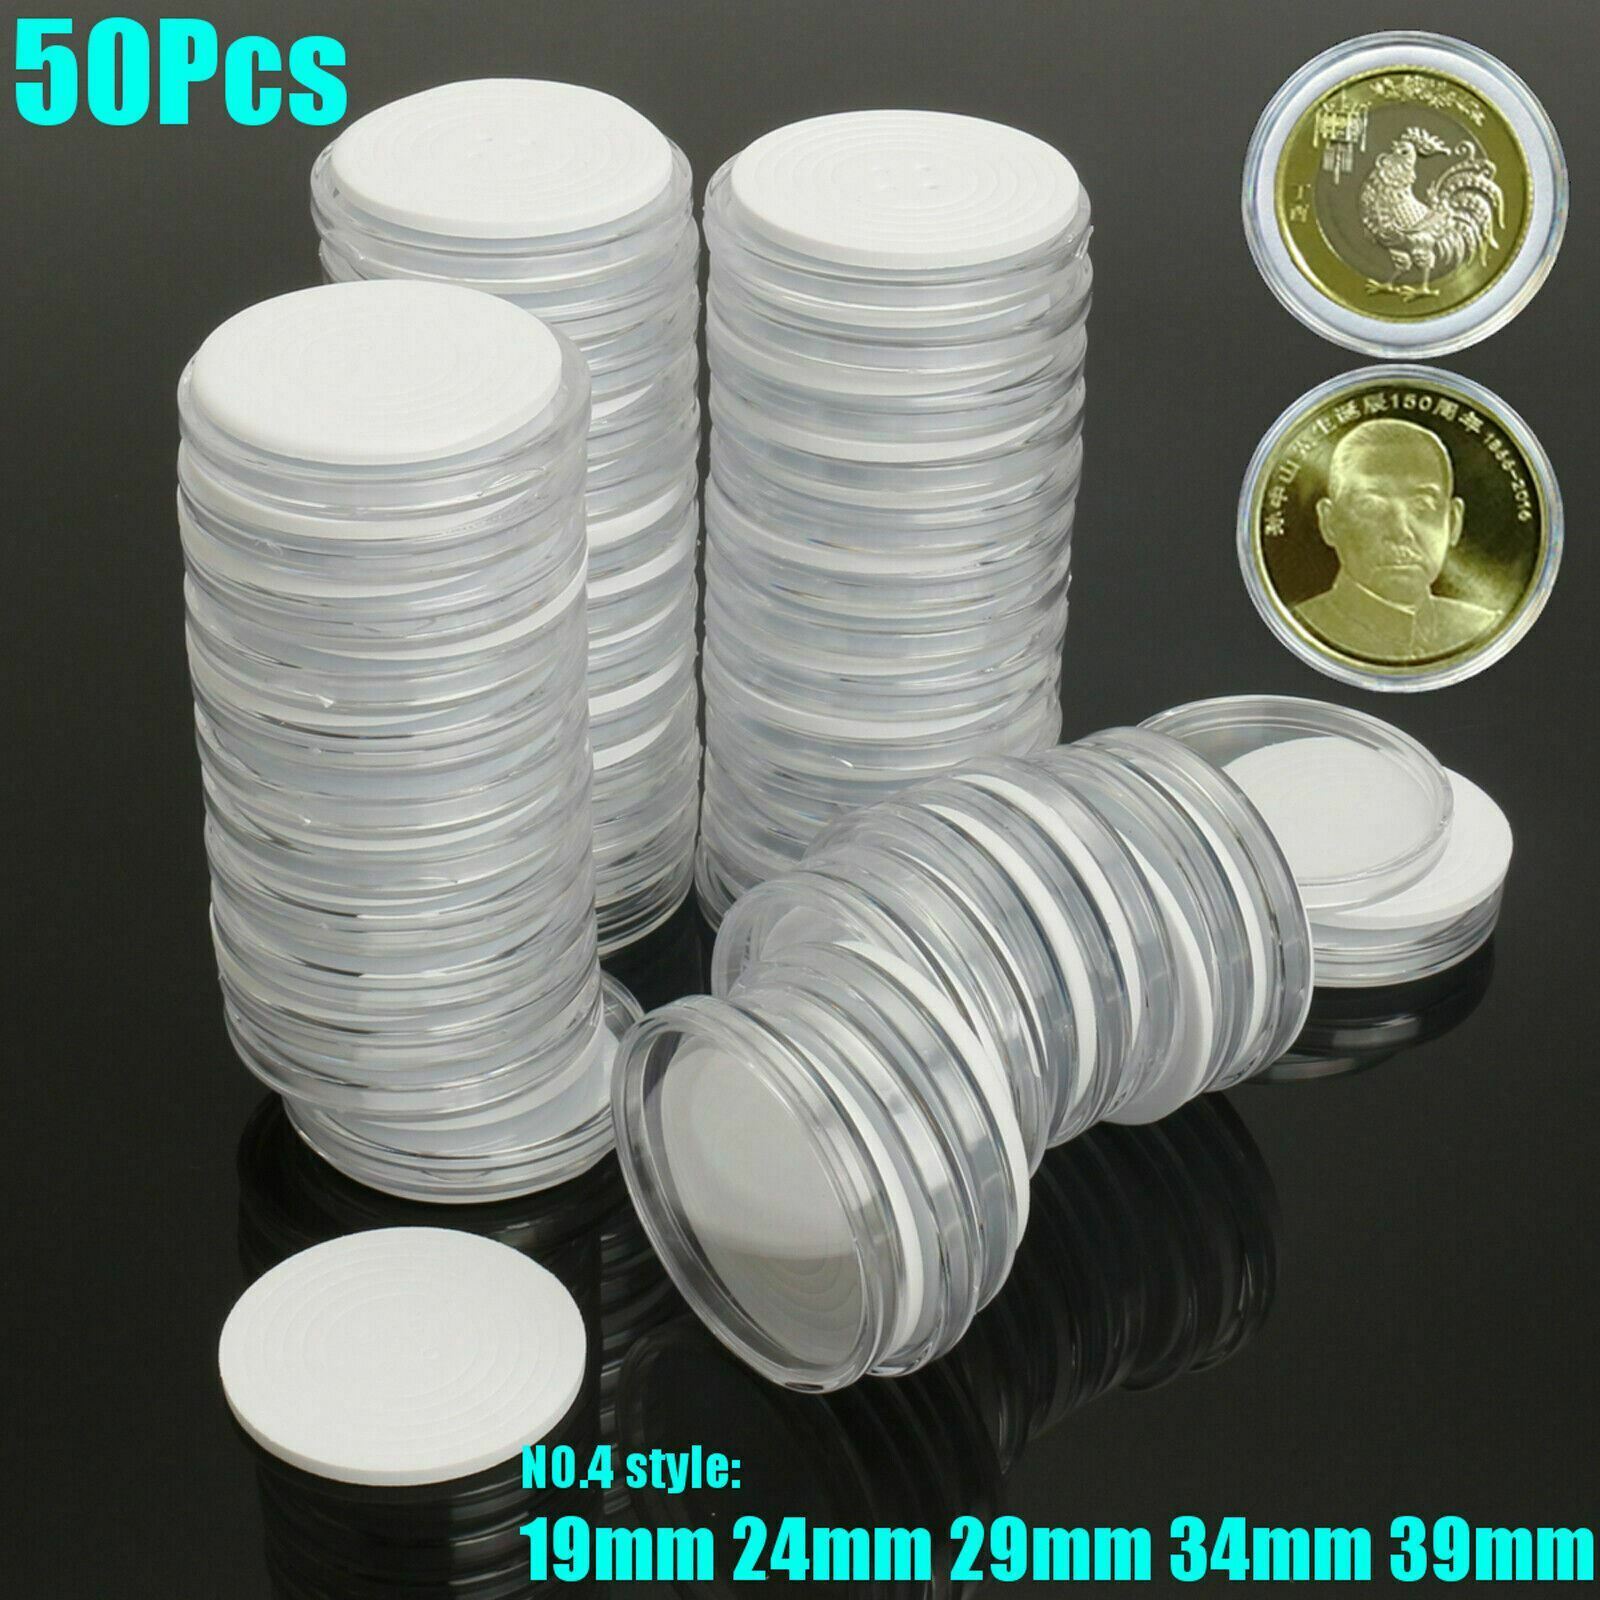 50pcs Clear Coin Plastic Holder Capsule Case Cover Adjustable 19 24 29 34 39mm